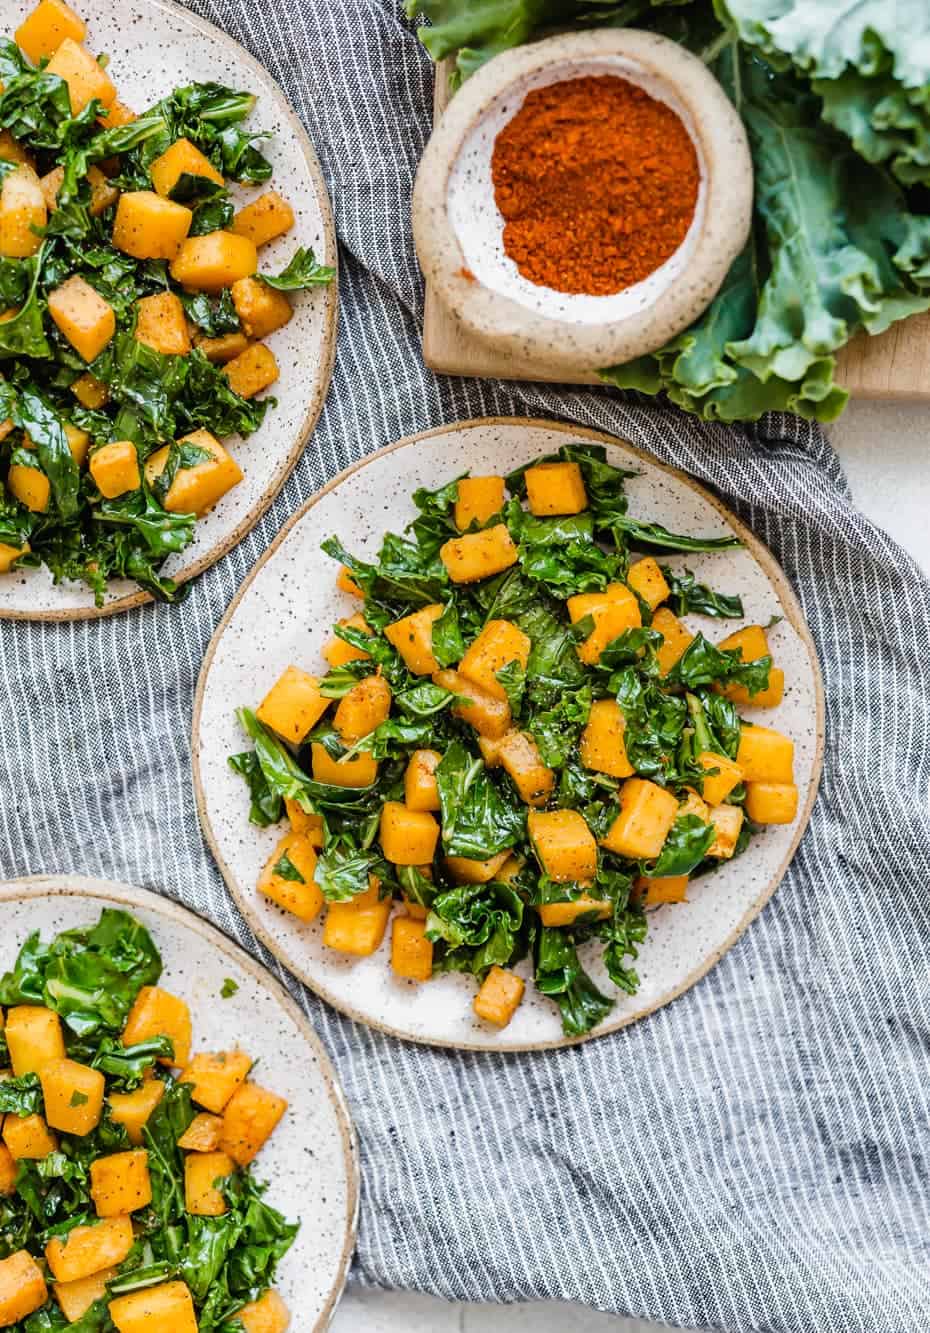 Three small plates with diced butternut squash and kale on them.